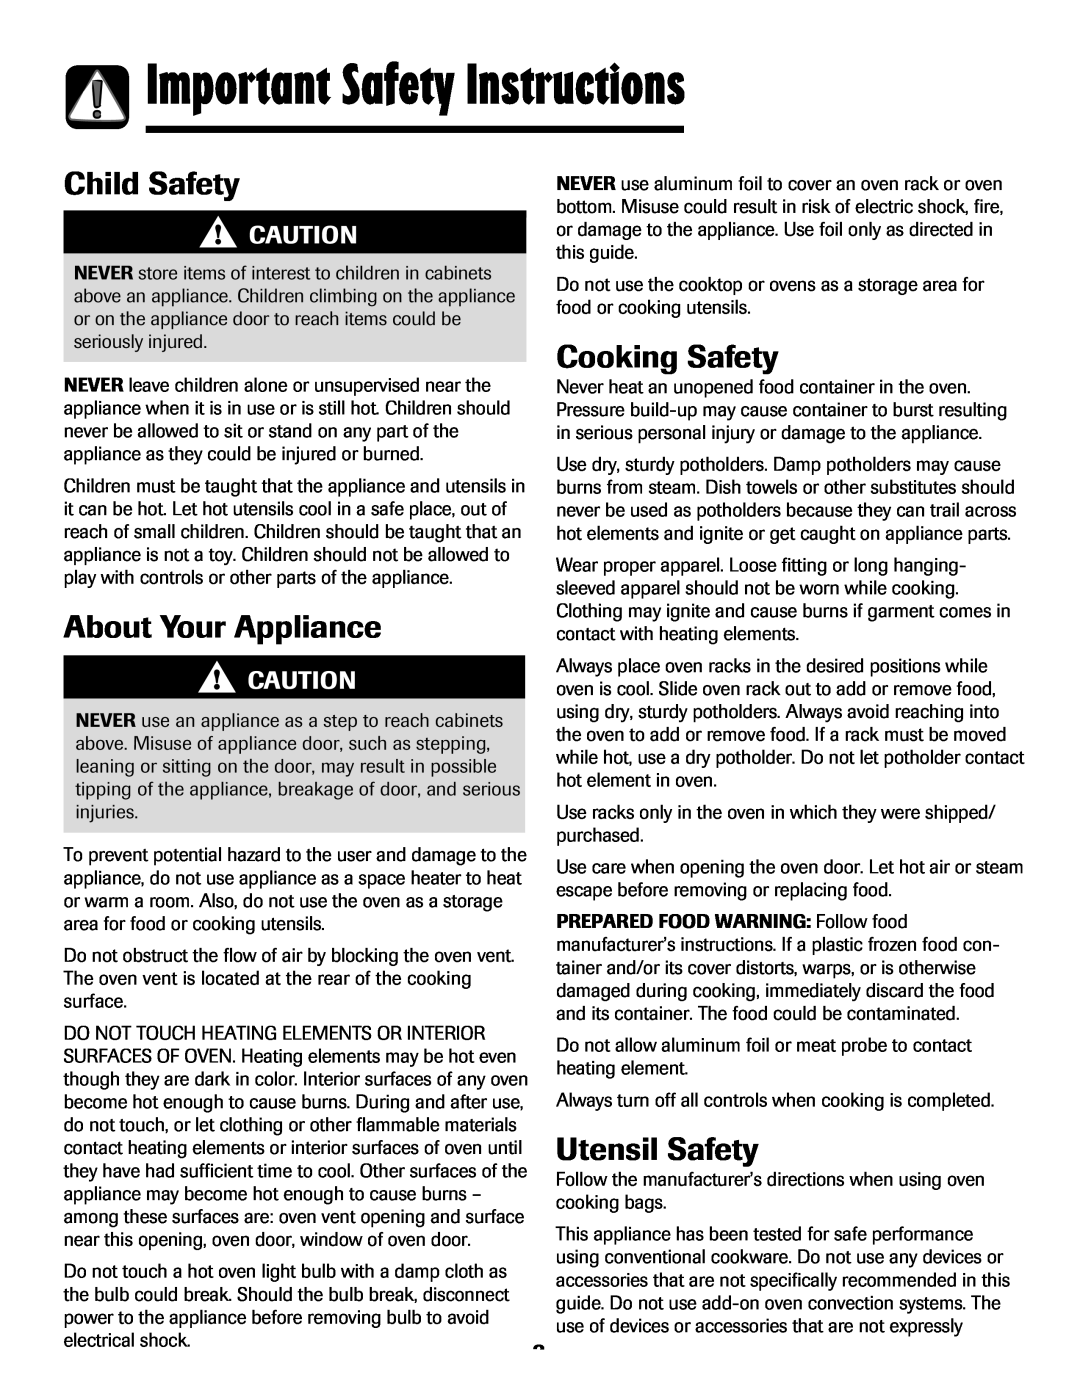 Maytag 8113P768-60 manual Important Safety Instructions, Child Safety, About Your Appliance, Cooking Safety, Utensil Safety 